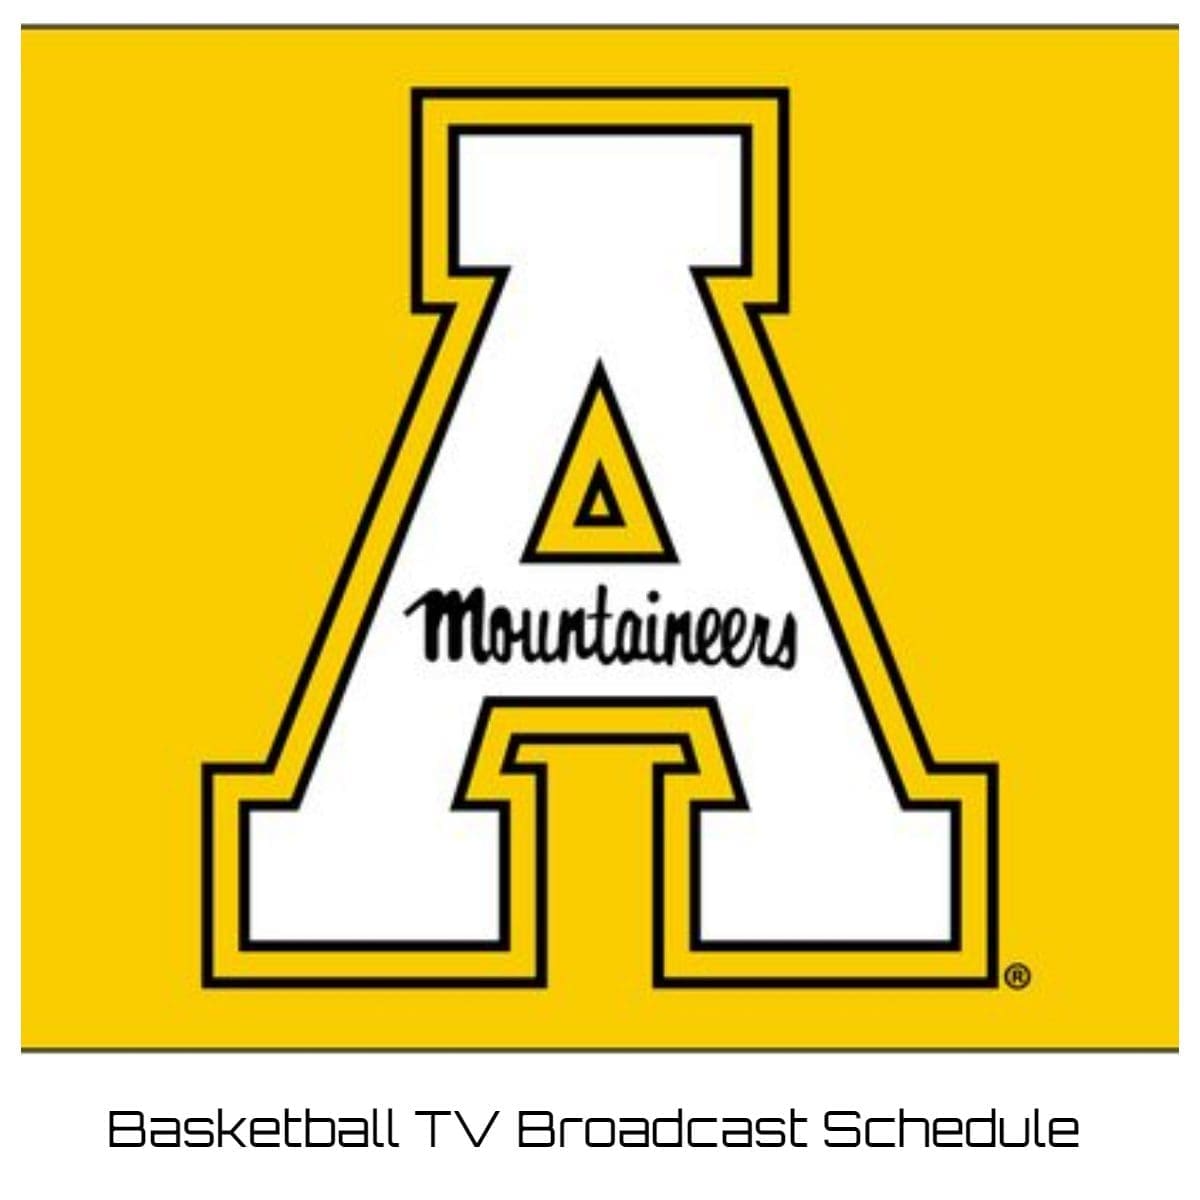 Appalachian State Mountaineers Basketball TV Broadcast Schedule